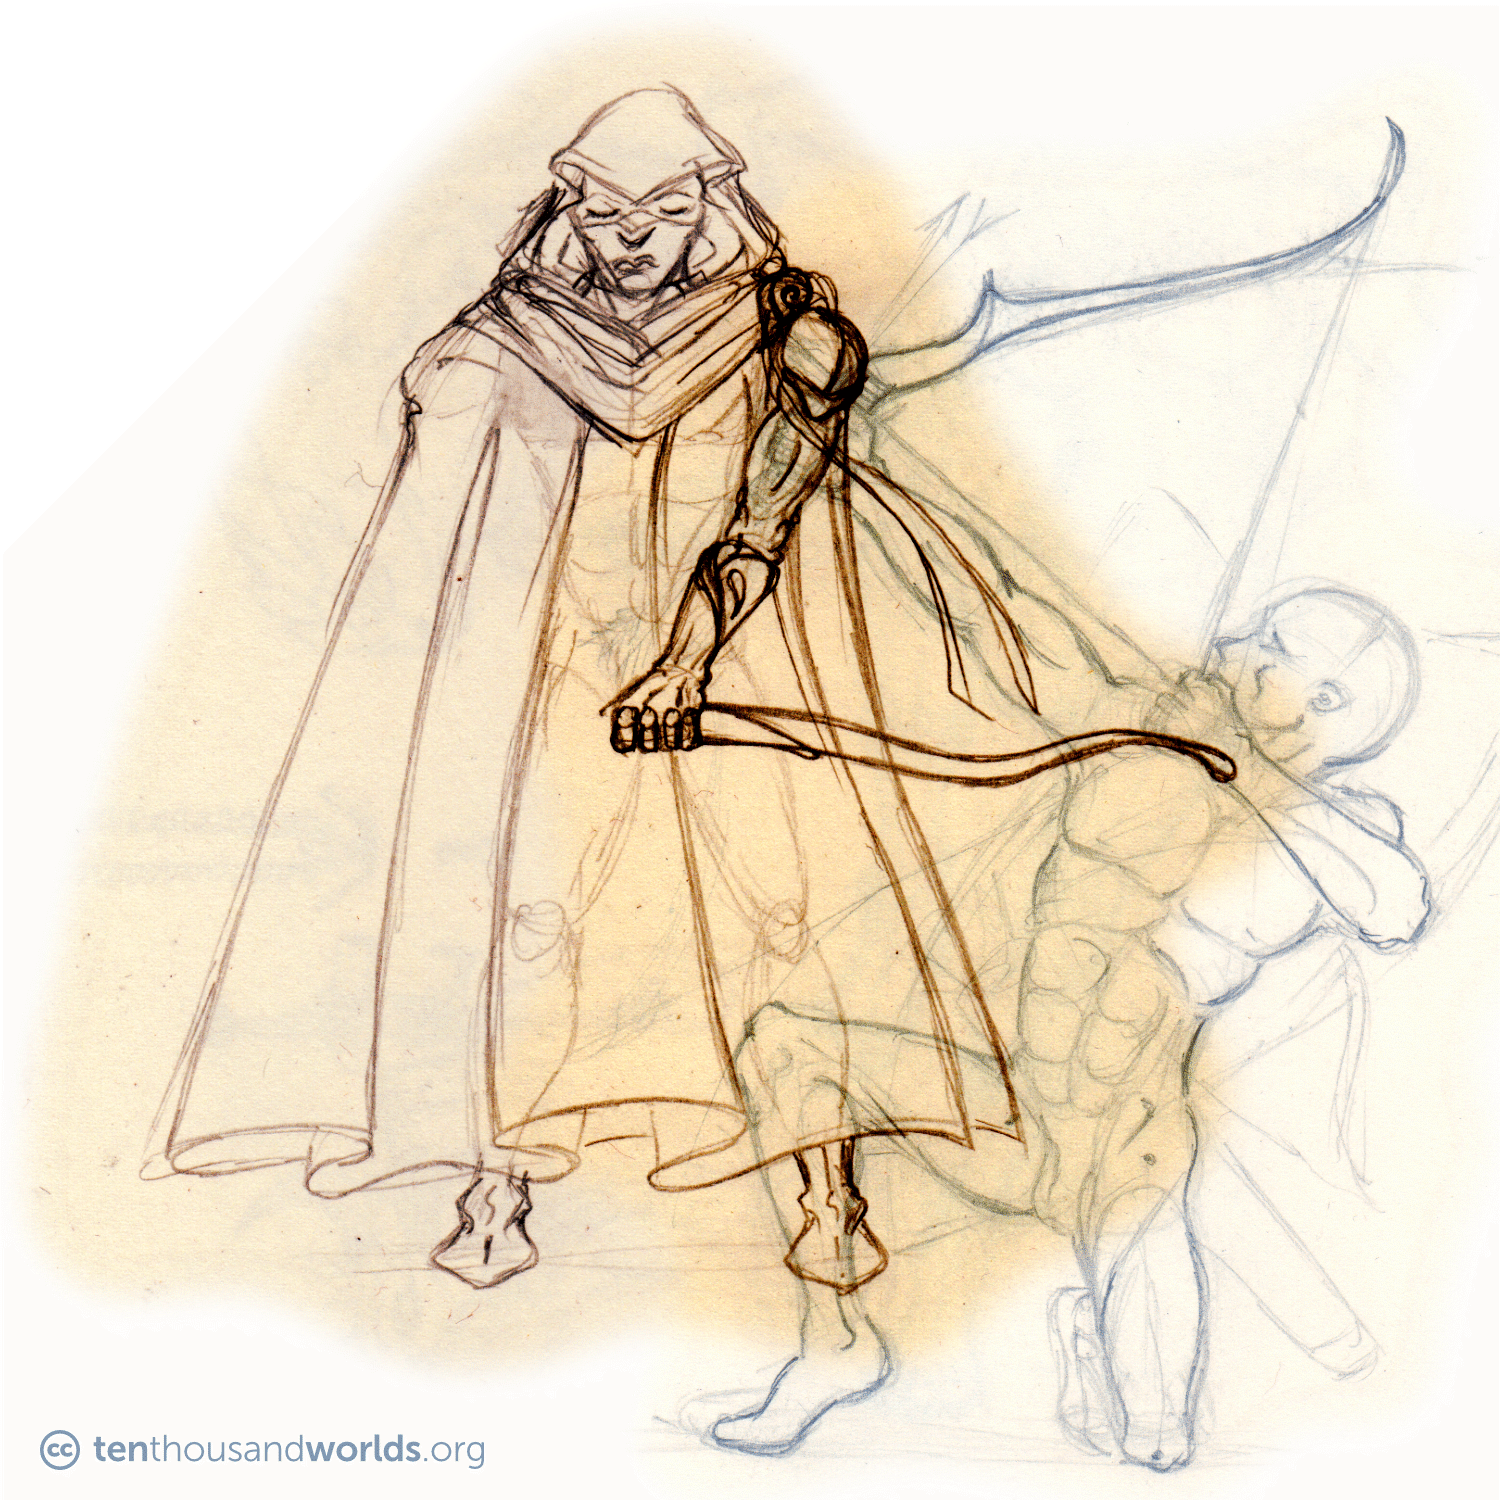 Two overlapping pencil sketches of an archer. In one, the figure is in a full cloak, with one arm free, holding a bow. In another, the figure is on one knee, pulling back a bow.